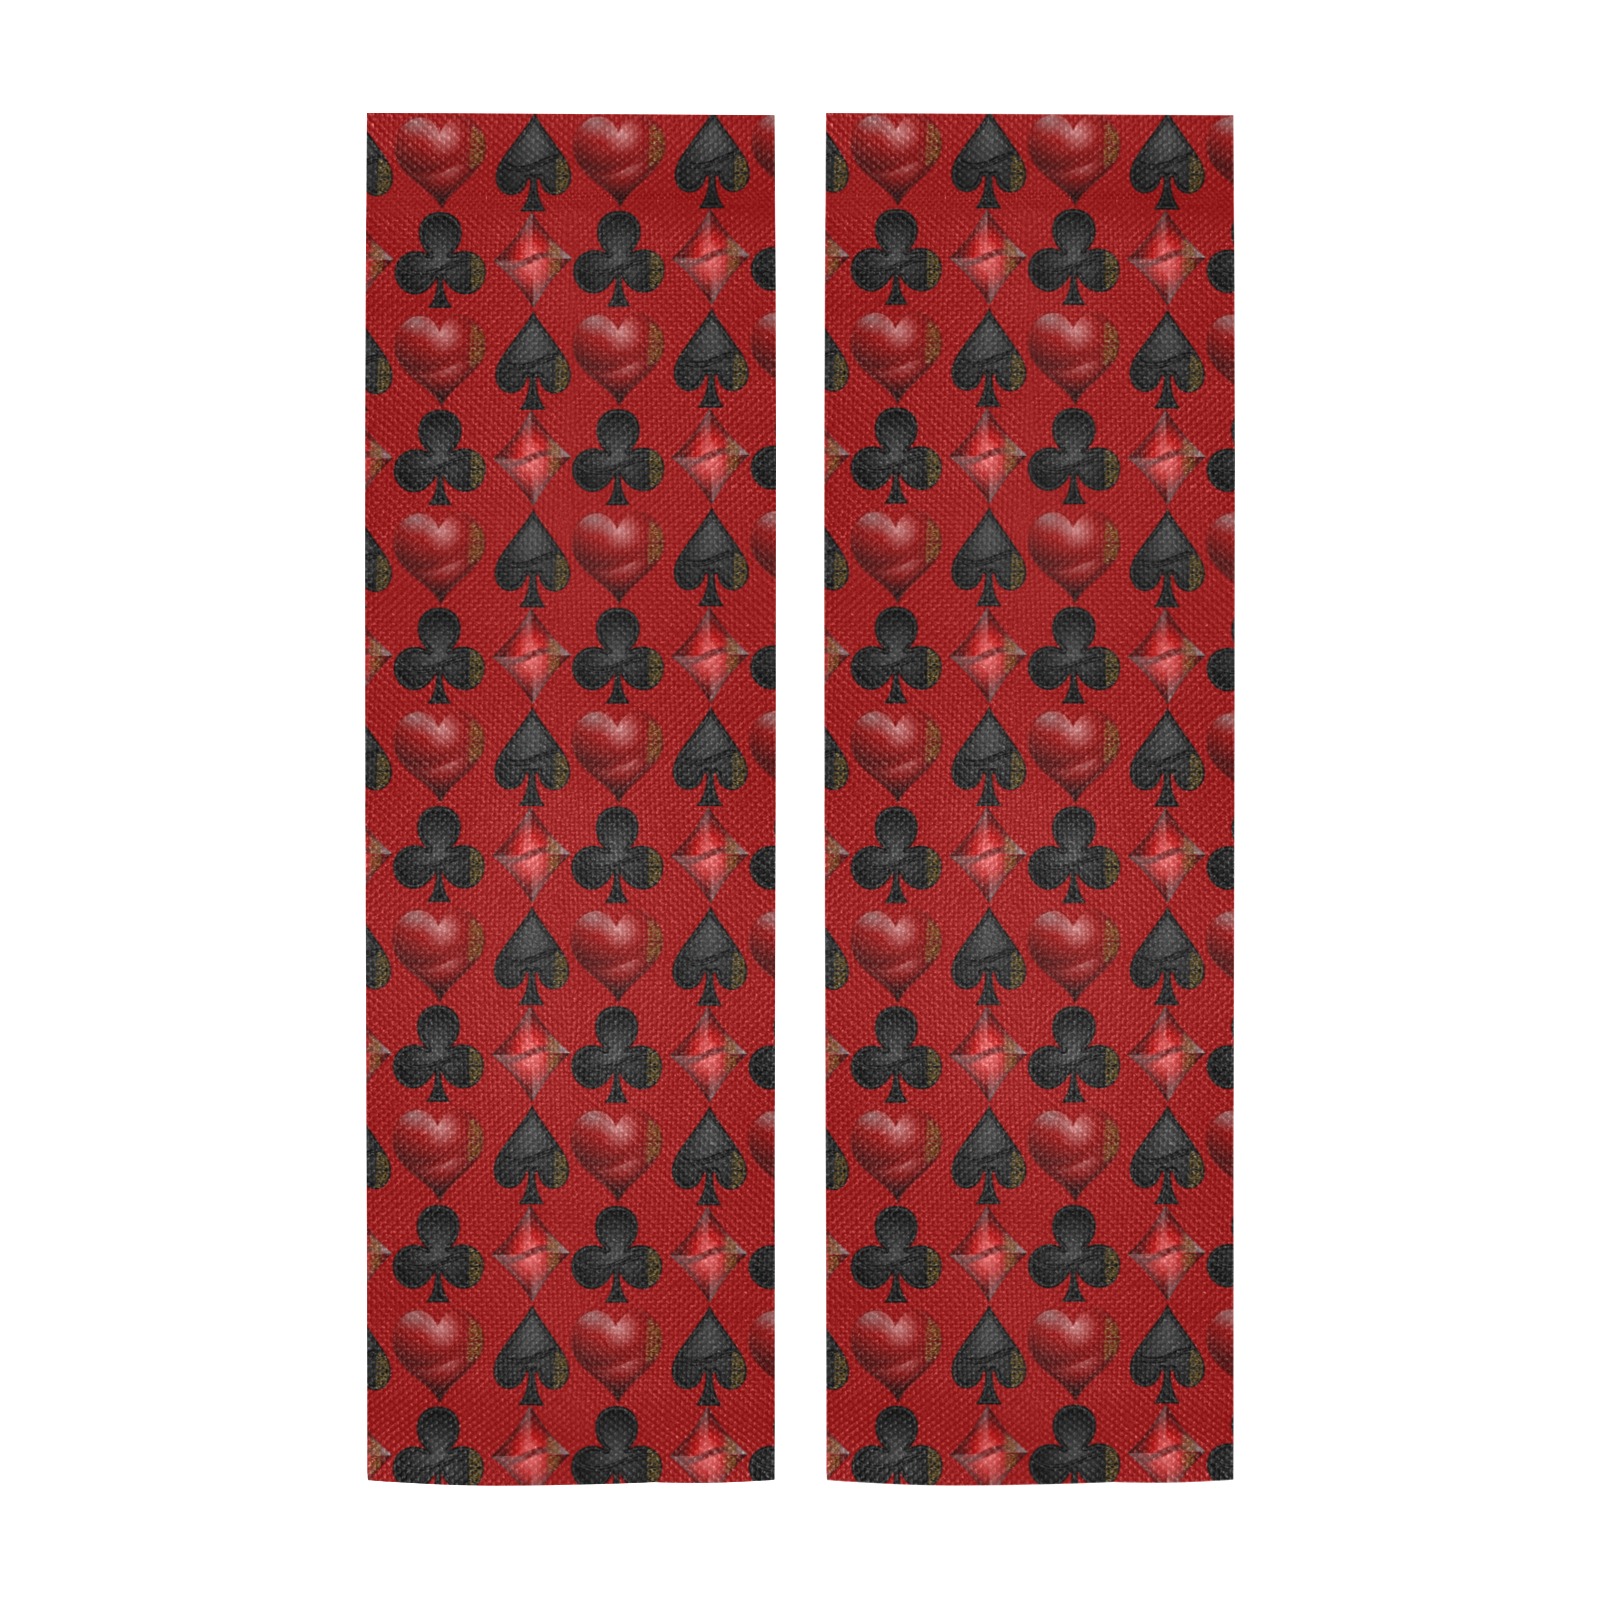 Las Vegas Playing Card Symbols on Red Door Curtain Tapestry